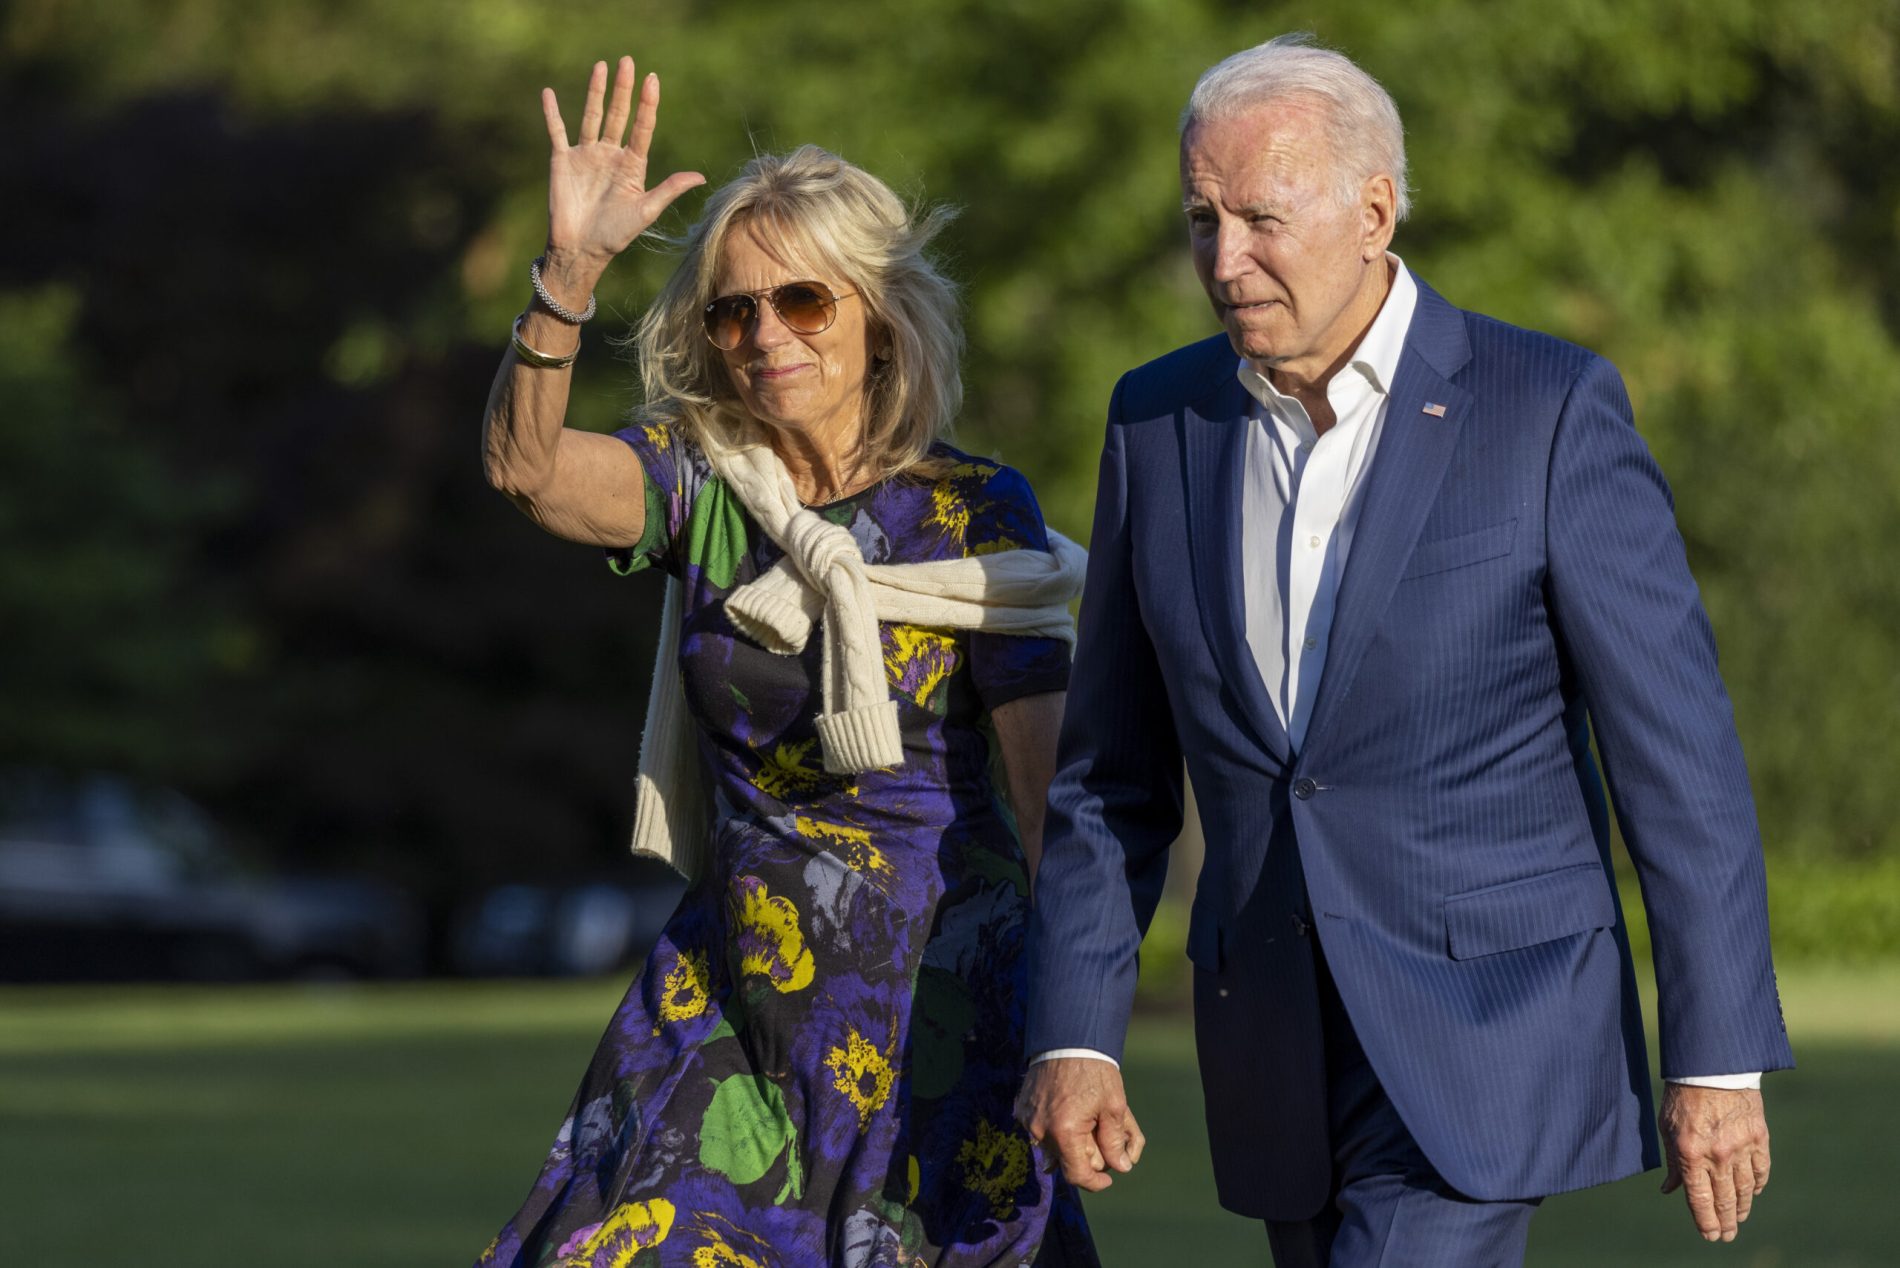 Biden’s Bay Area Mega Donors: Here’s a List of Top Campaign Contributors